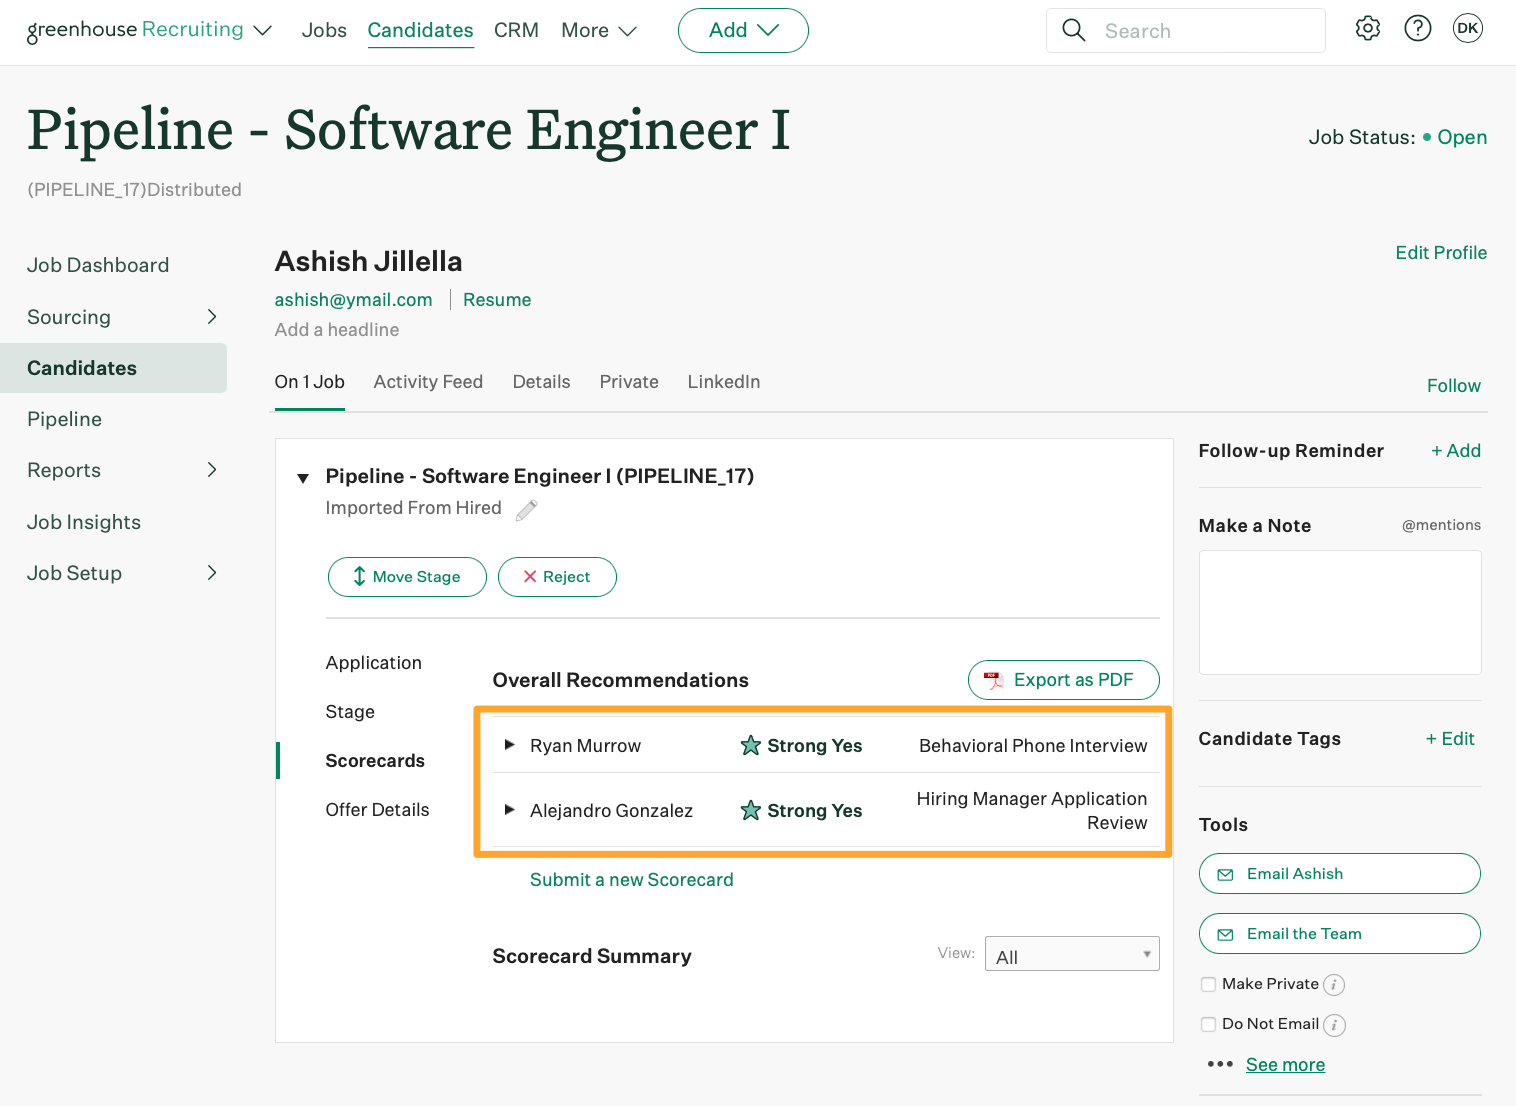 An example candidate named Ashish Jillella is shown with strong yes scorecards on two interviews on the Pipeline - Software Engineer 1 job